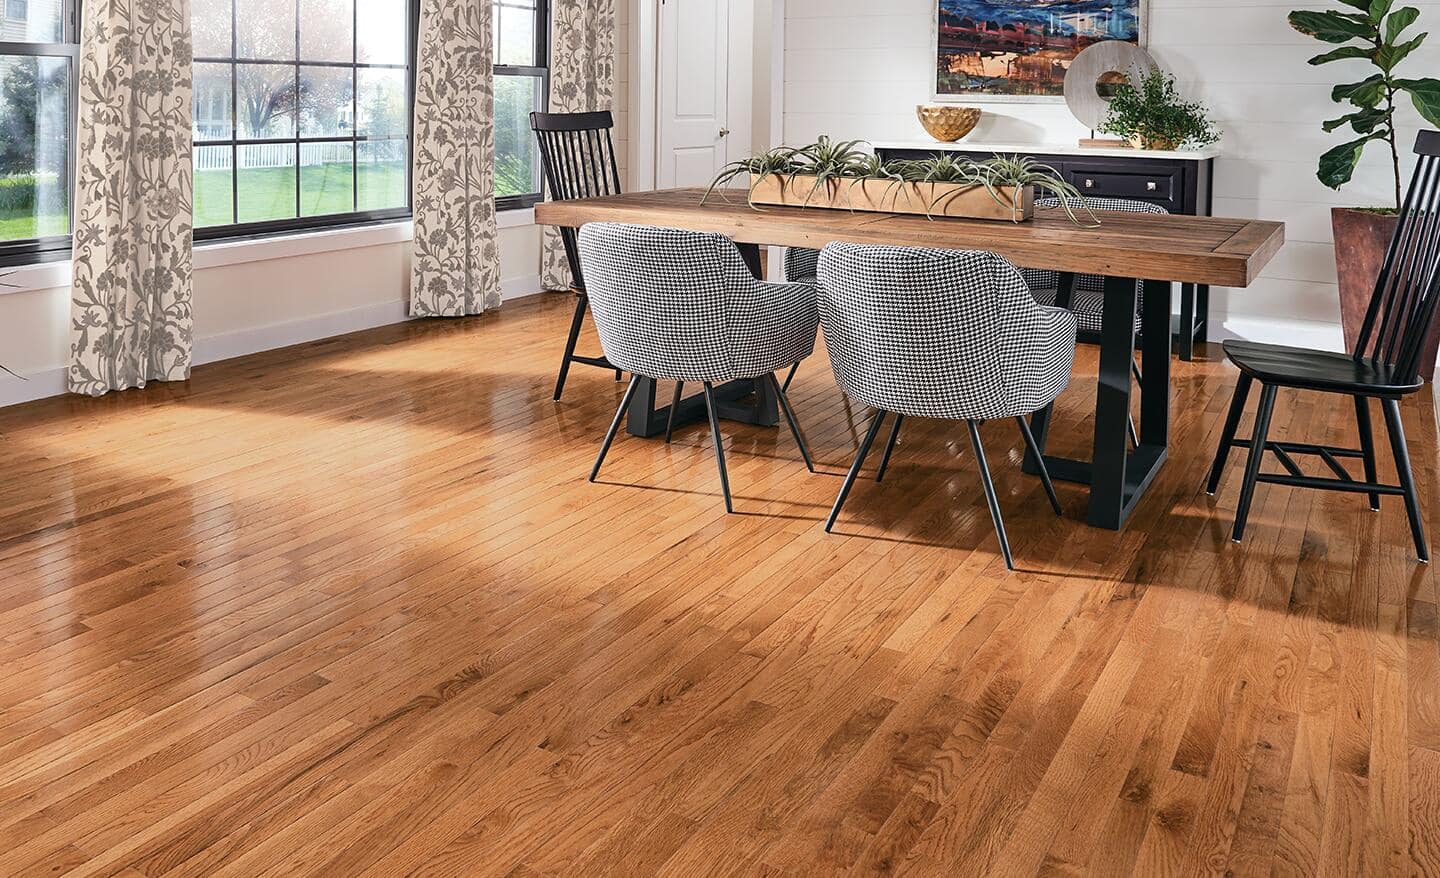 A dining room featuring a warm, hardwood floor.